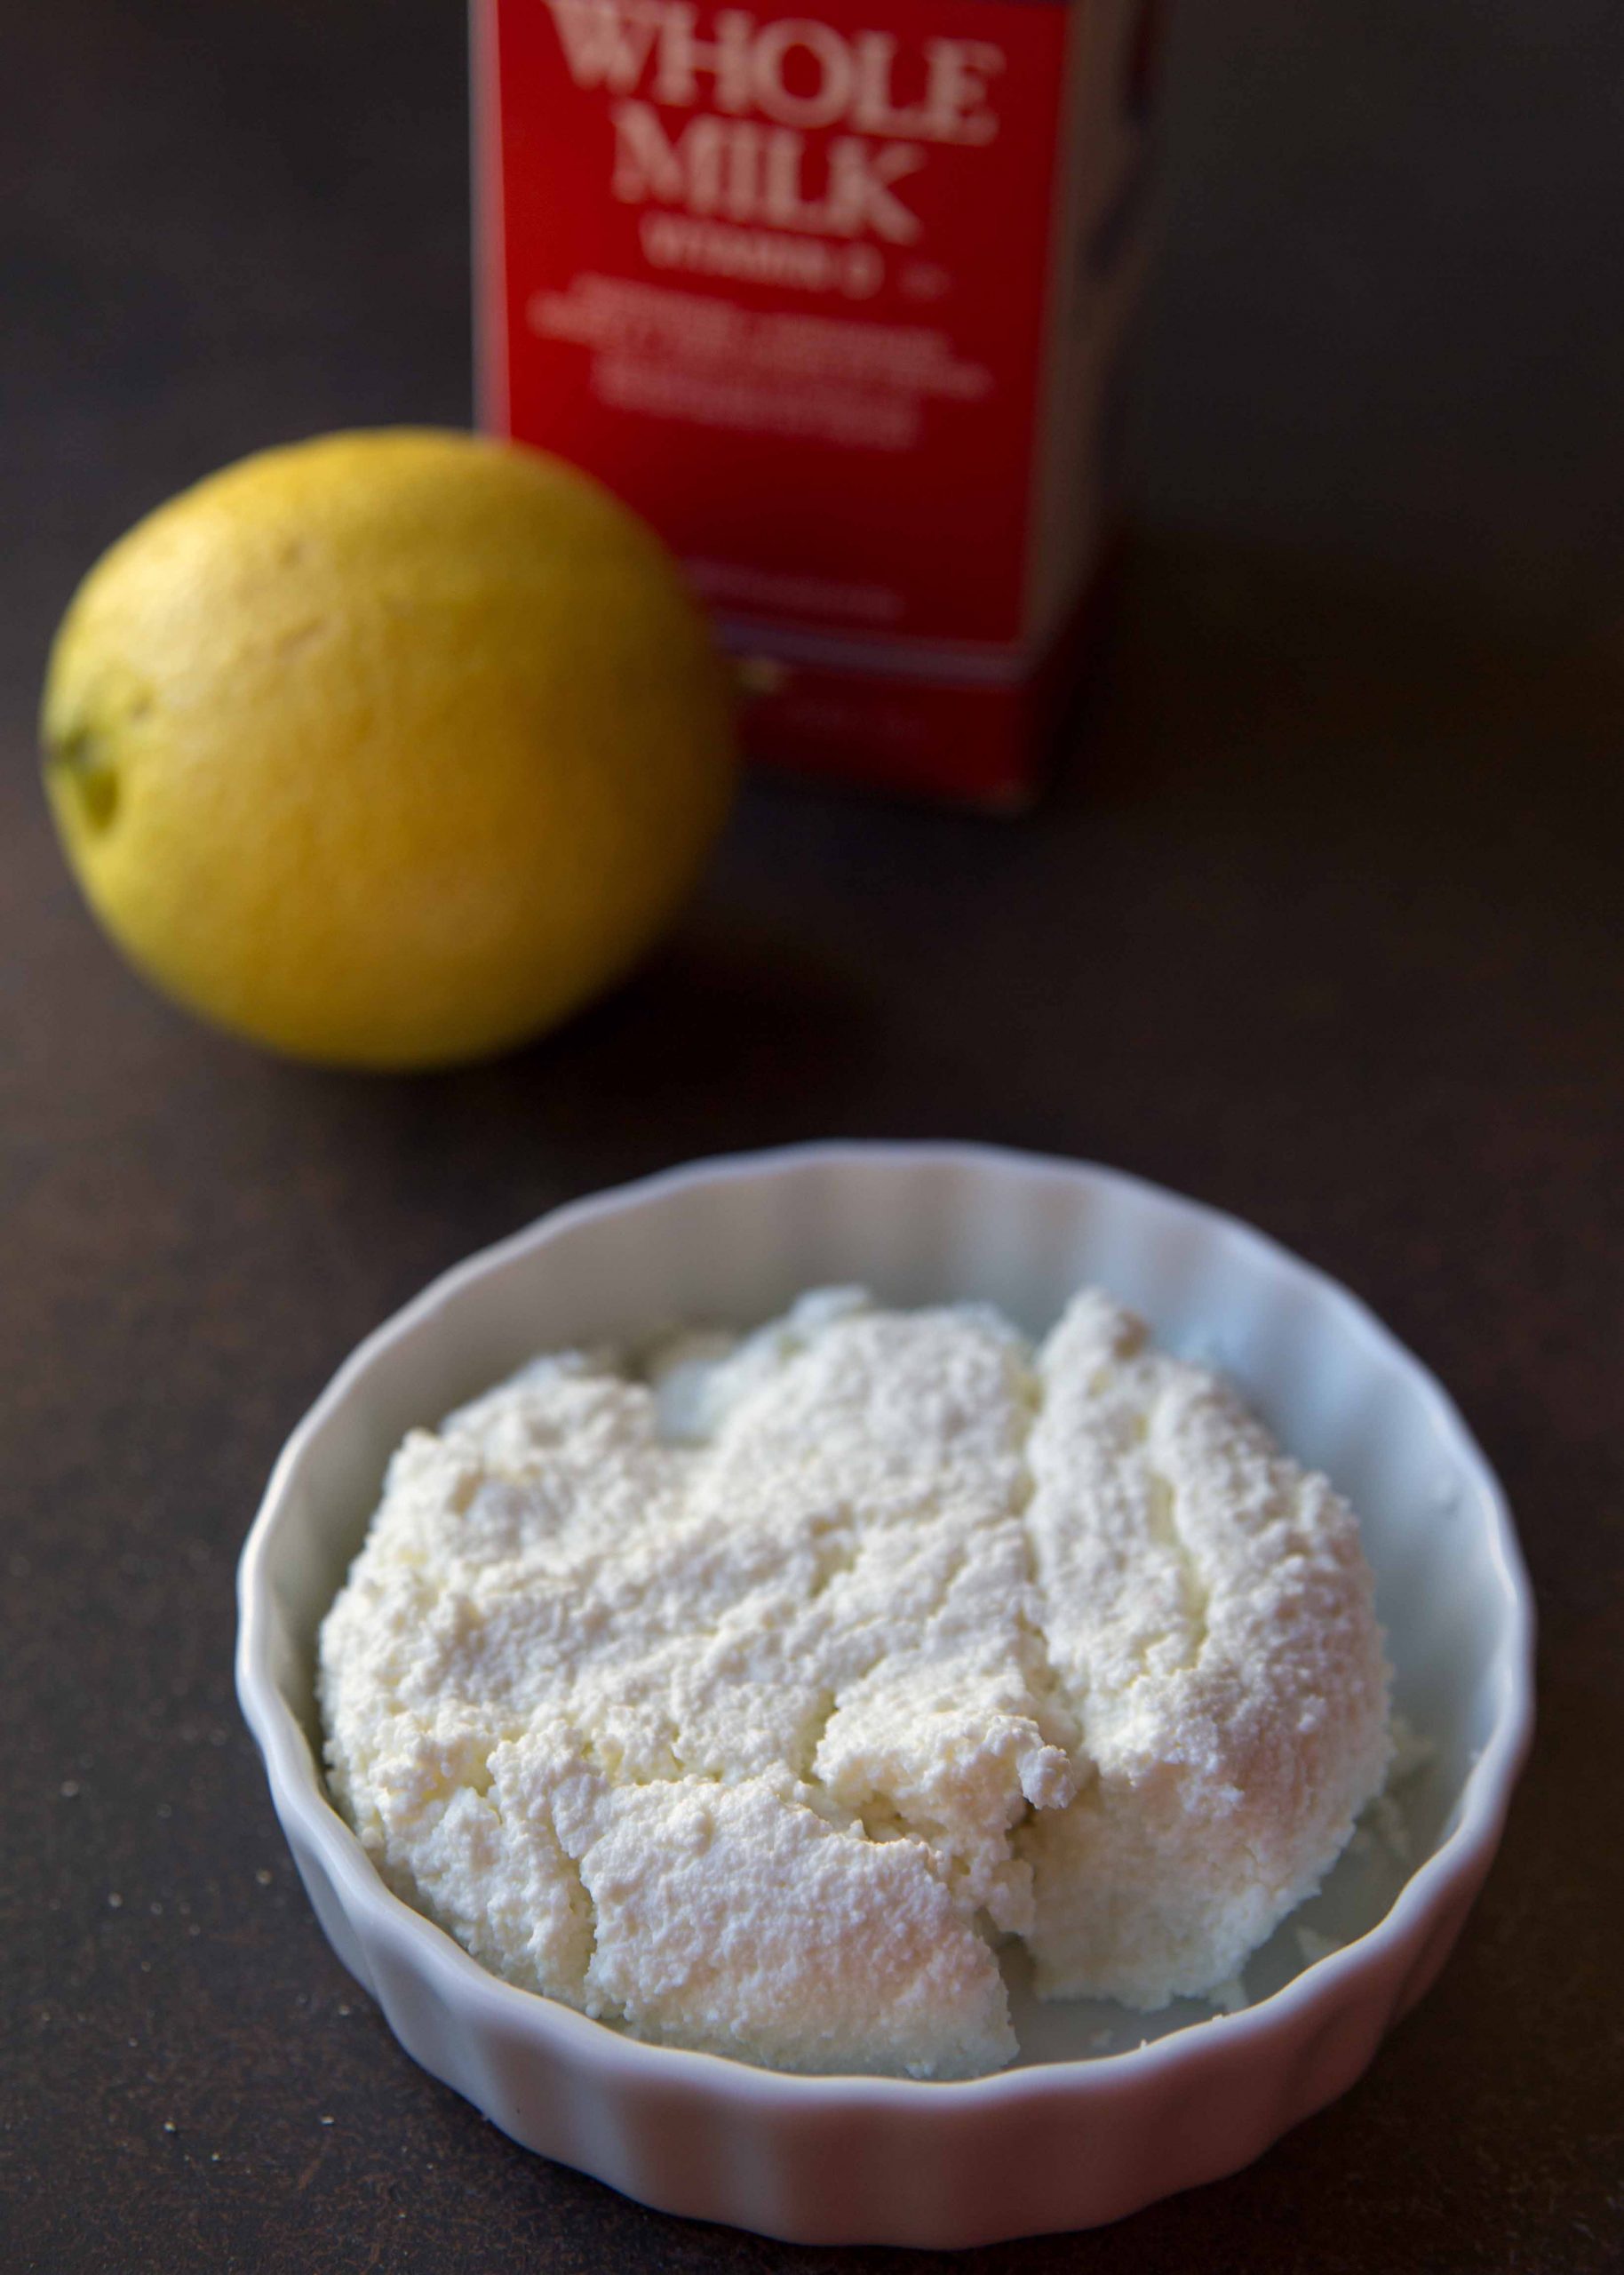 Just 3 ingredients and 15 minutes required to make homemade ricotta. Once you taste whole milk ricotta made from scratch, you can't go back to store-bought.